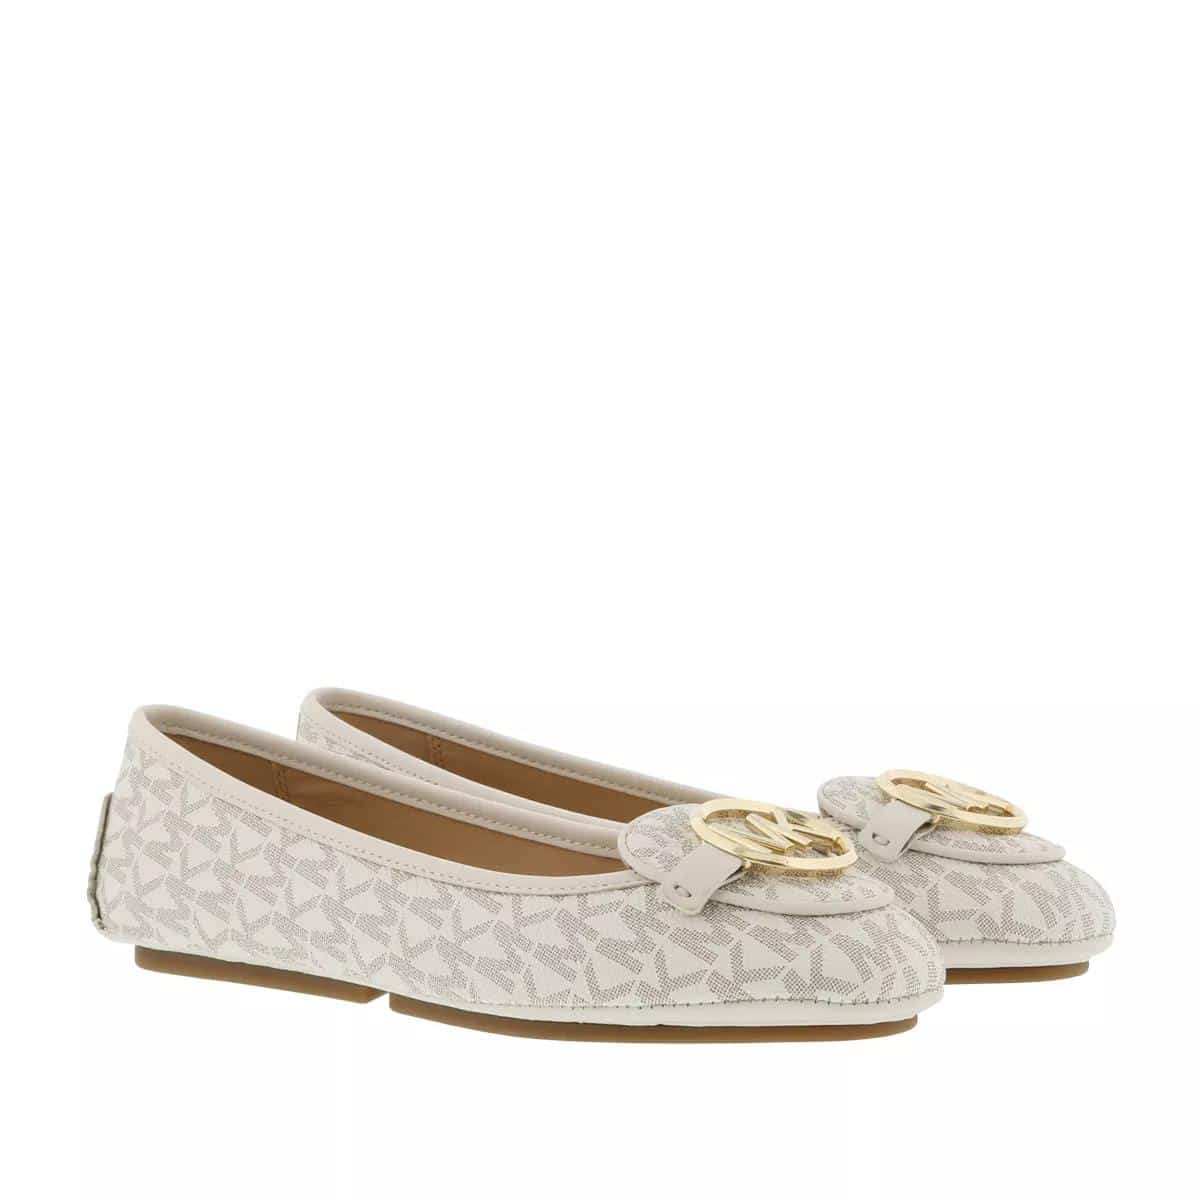 Michael Kors Slippers - Lillie Moc in crème